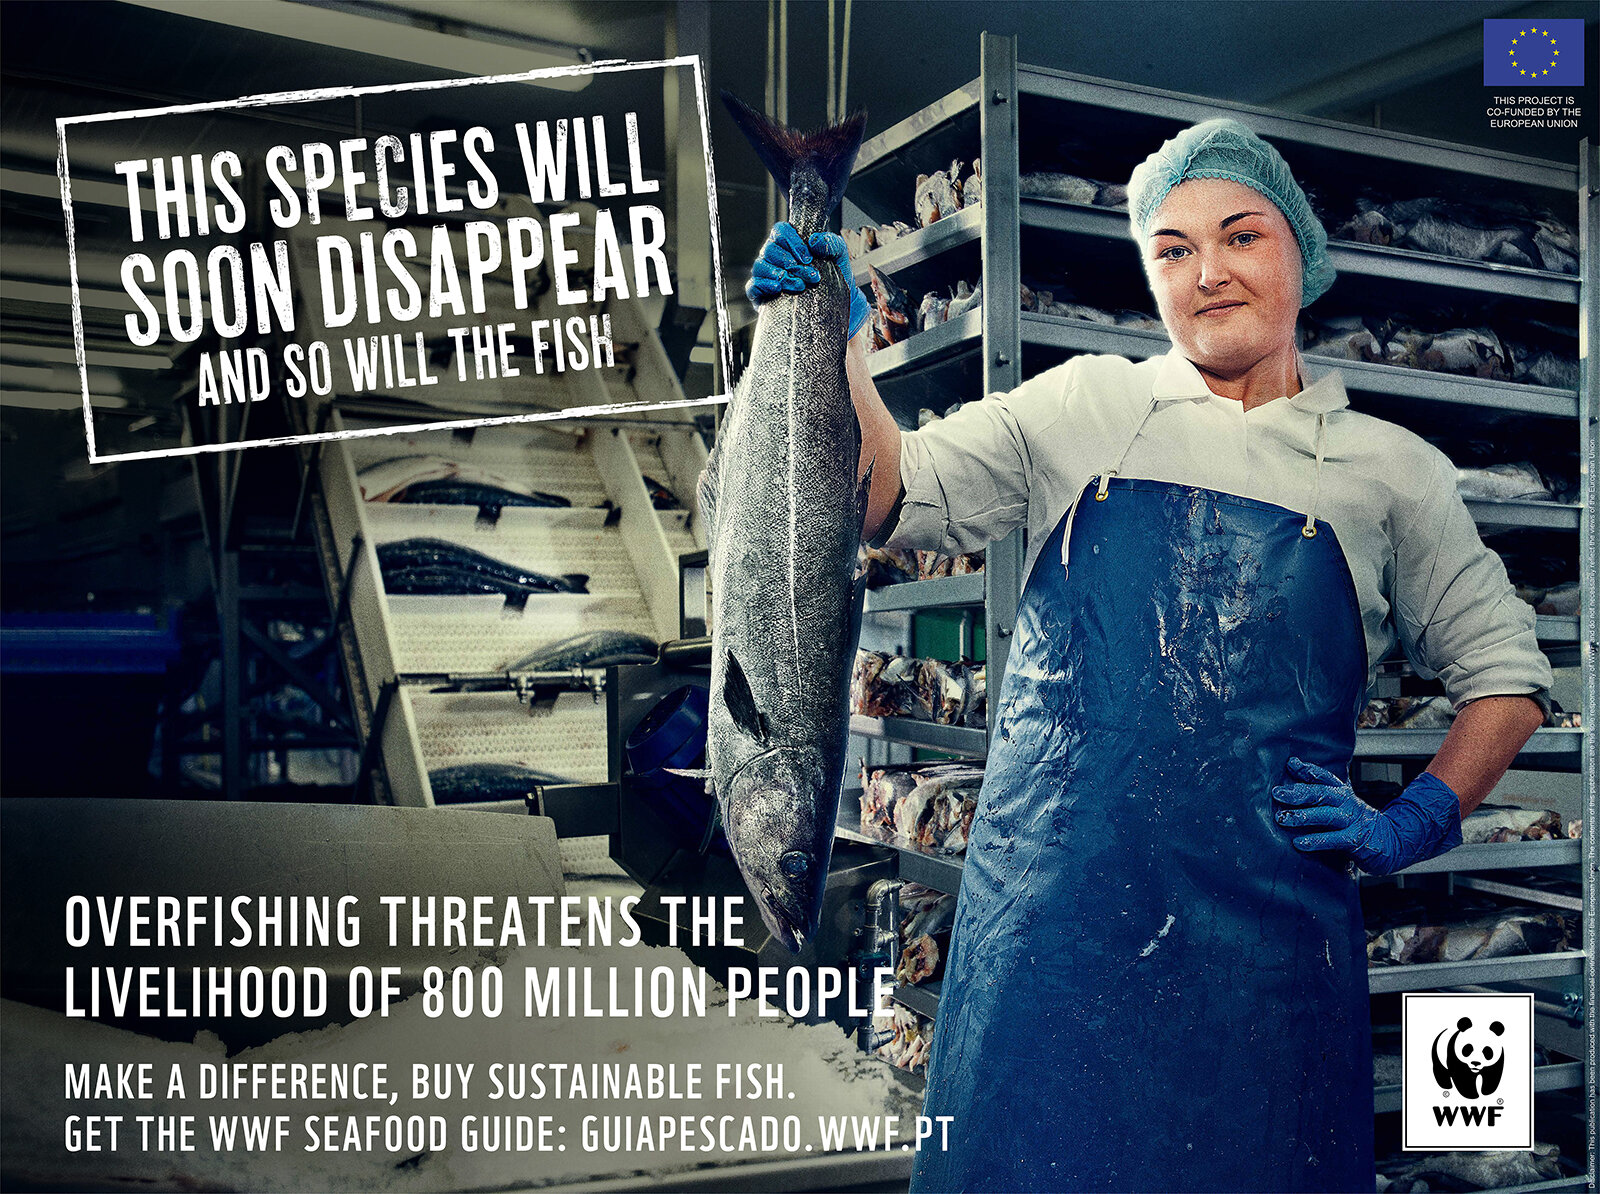 77843_WWF_FF2_campaign_Outdoor_Europeanwoman_4064x3048mm_50pct.jpg